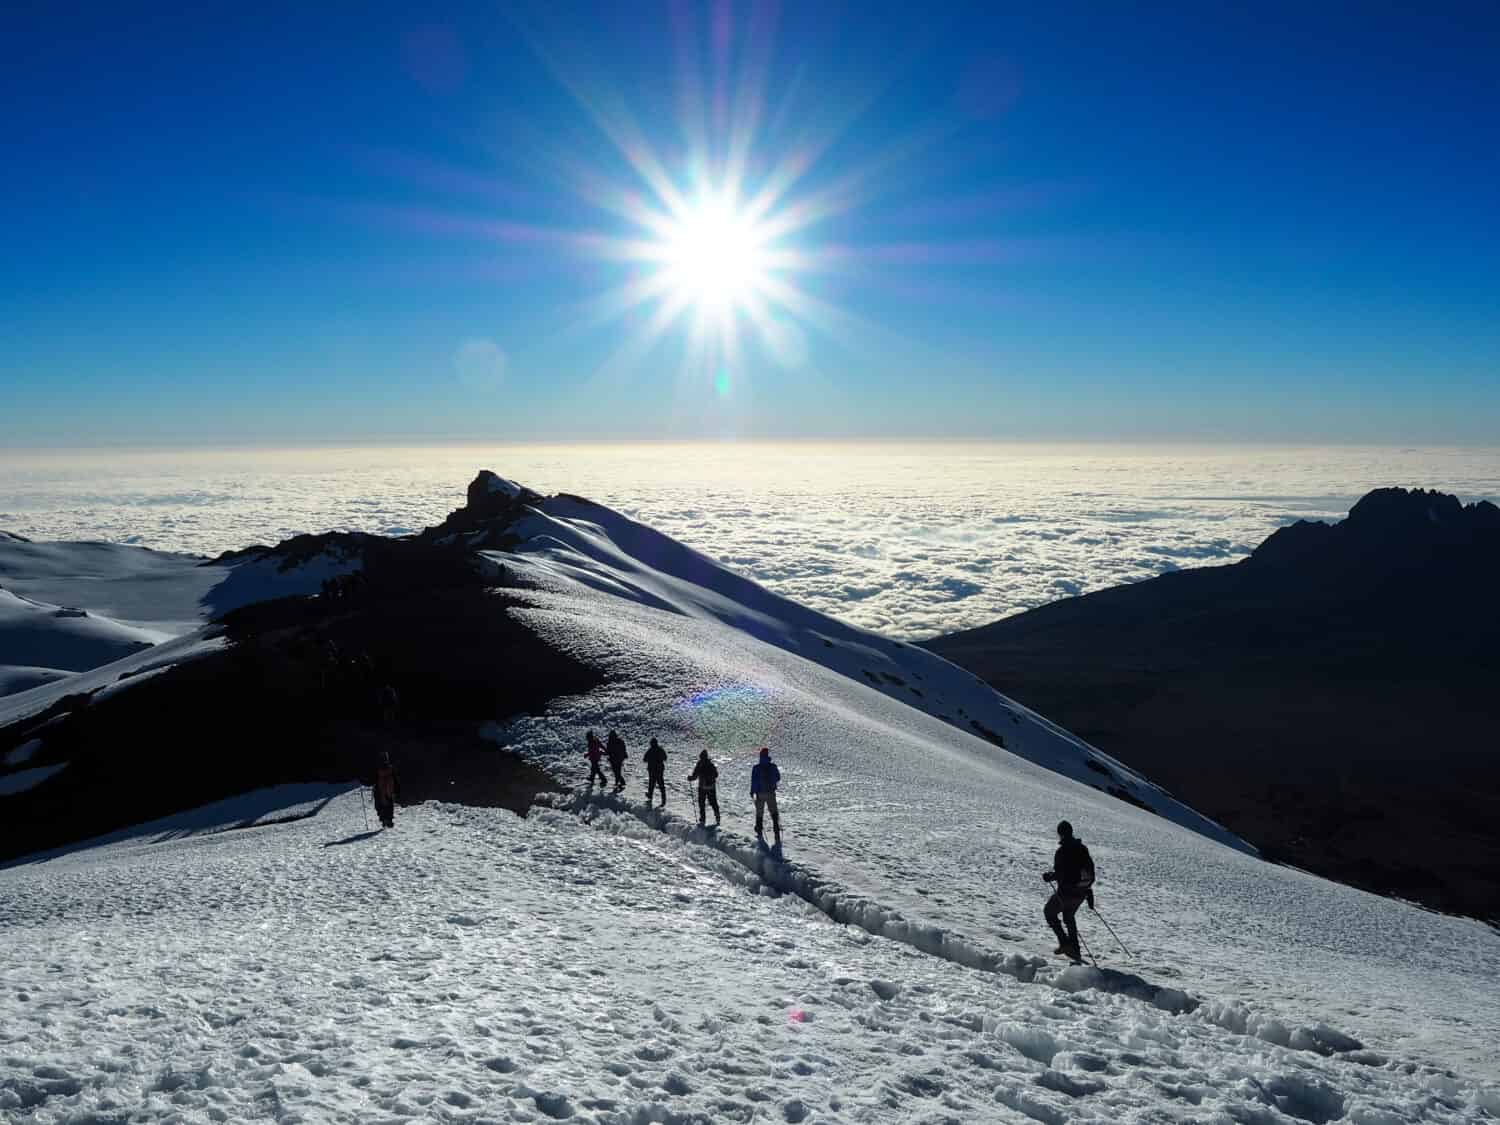 Hikers make their way to the summit of Mount Kilimanjaro on the snow